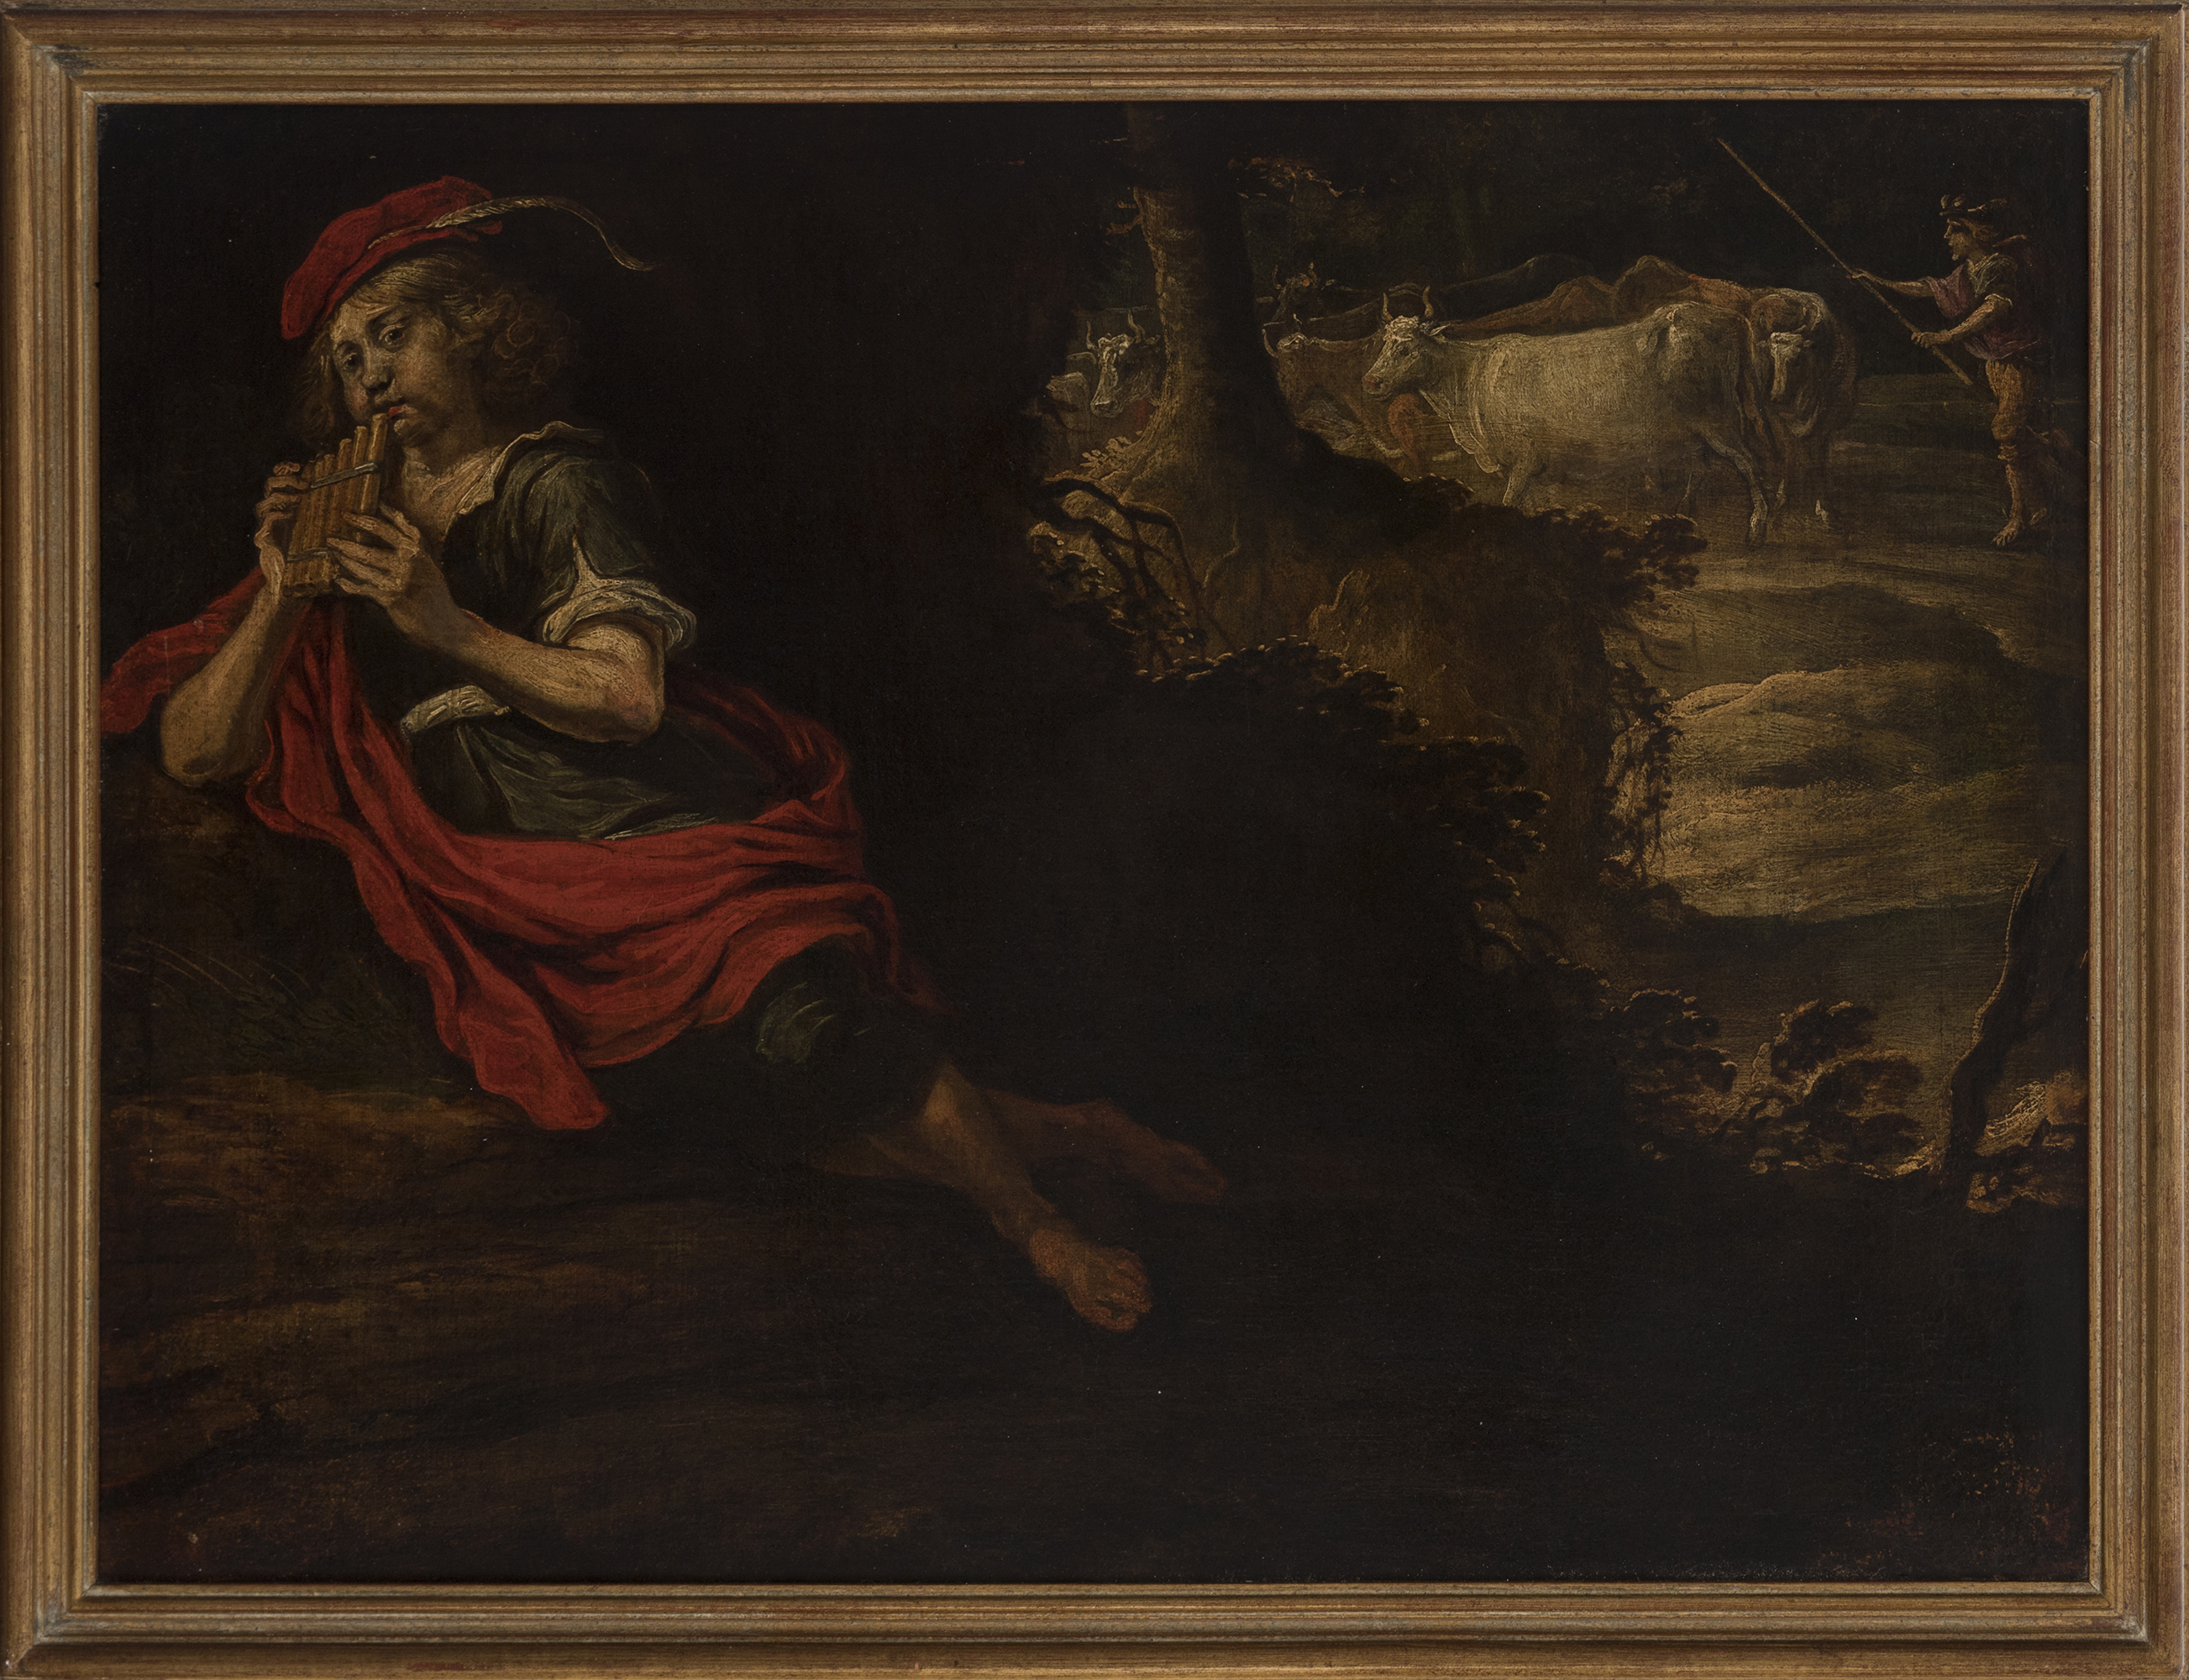 Flemish school; Last third of the XVII century. "Shepherd with pan flute". Oil on canvas. Relined.